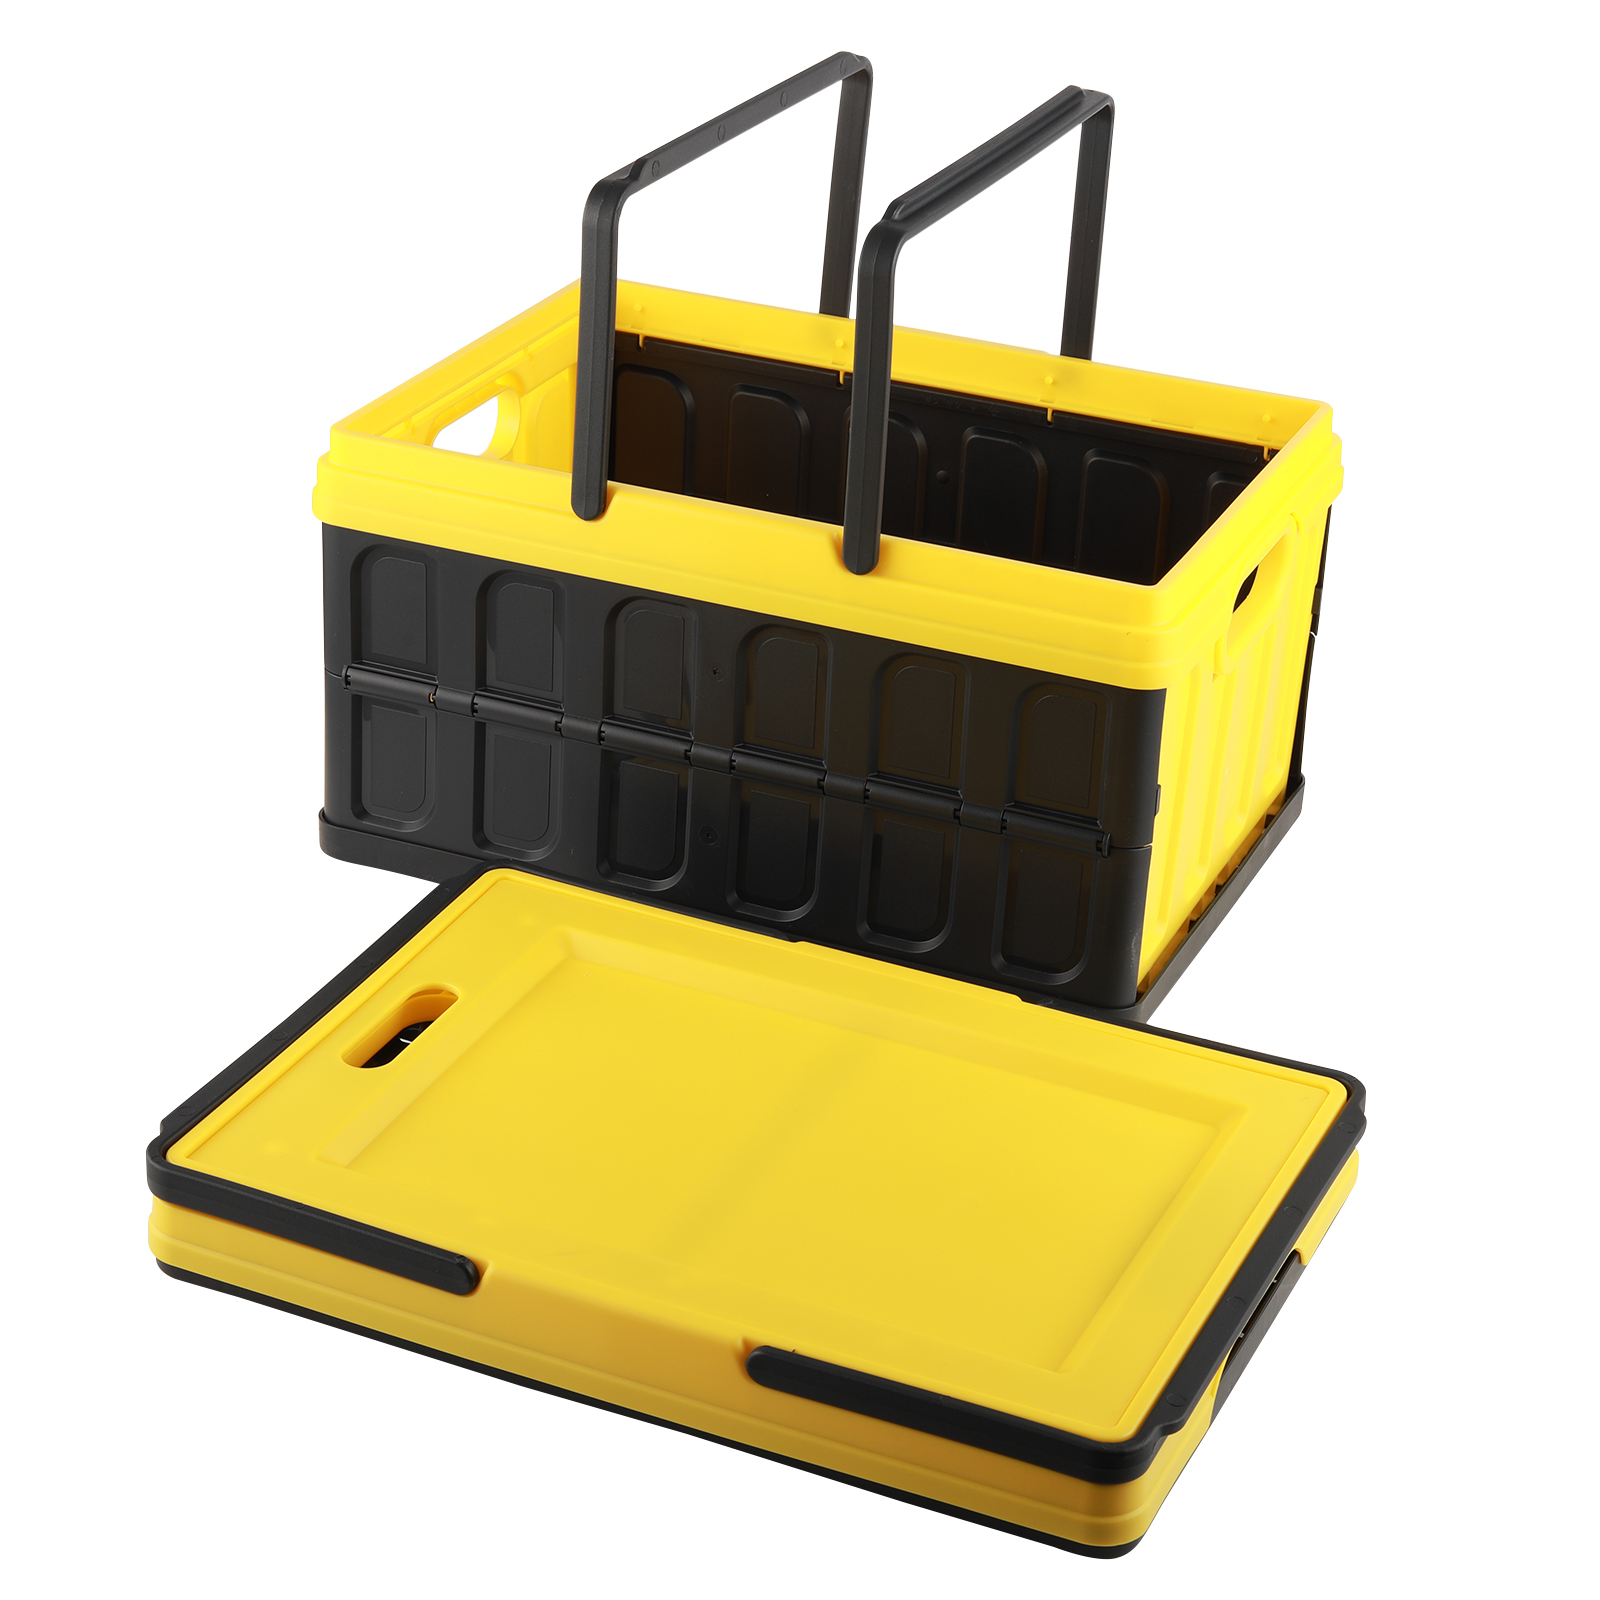 How does Plastic foldable storage boxes work?